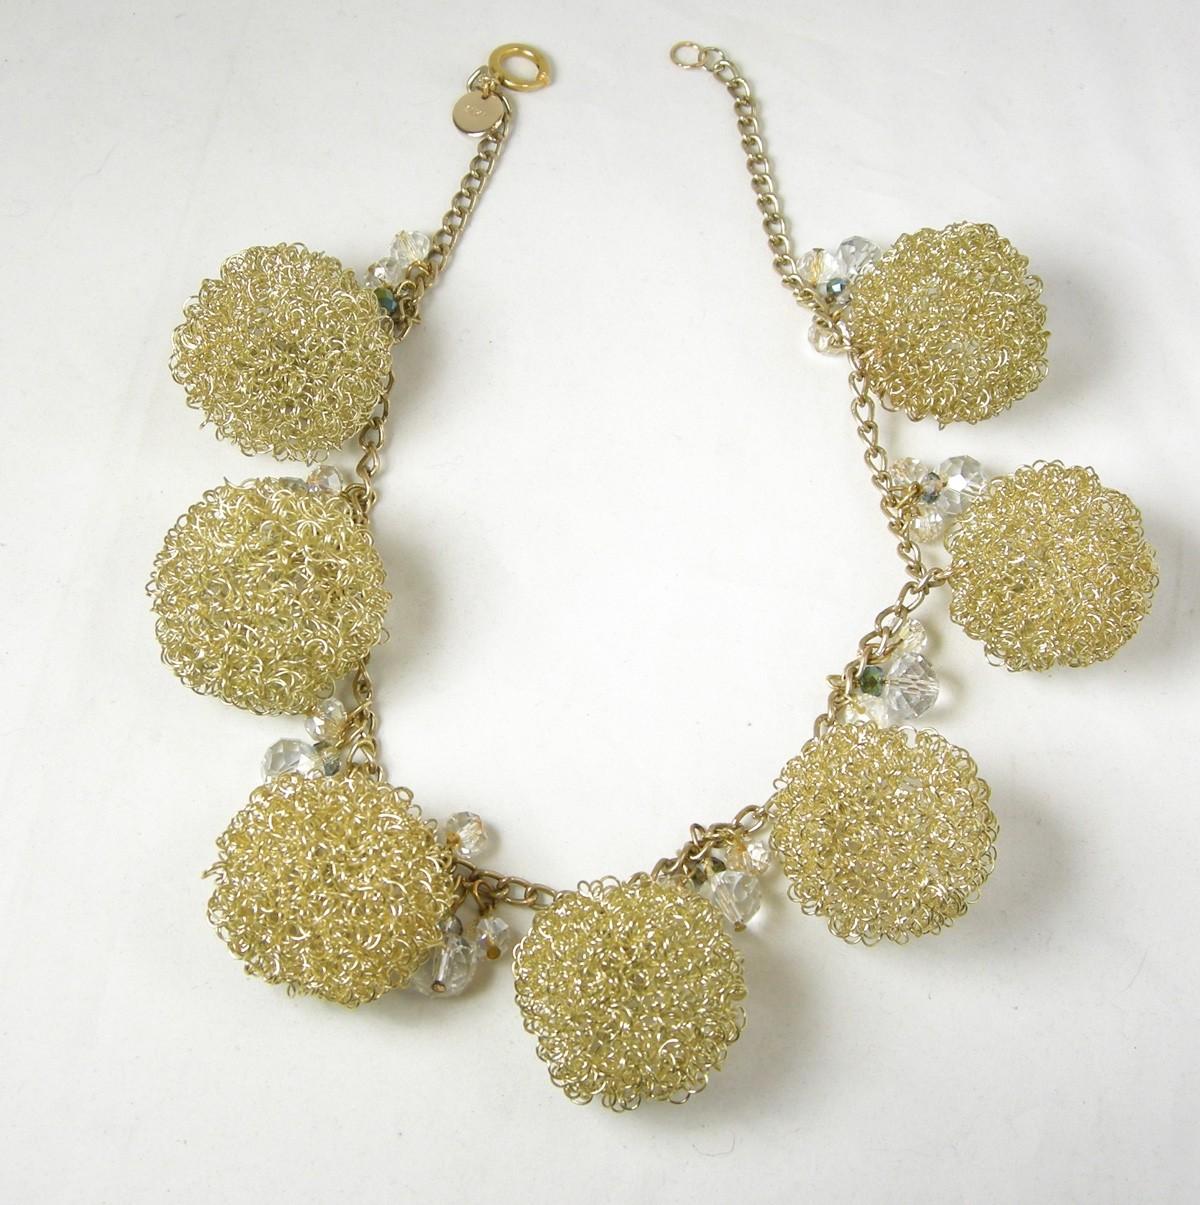 People love this type of necklace … especially when it’s made by Anka. It has 7 gold tone mesh balls with glass beads in-between each ball. It is 17” long with a round push back clasp. Each mesh ball is 5” around. It is signed “Anka” and is in